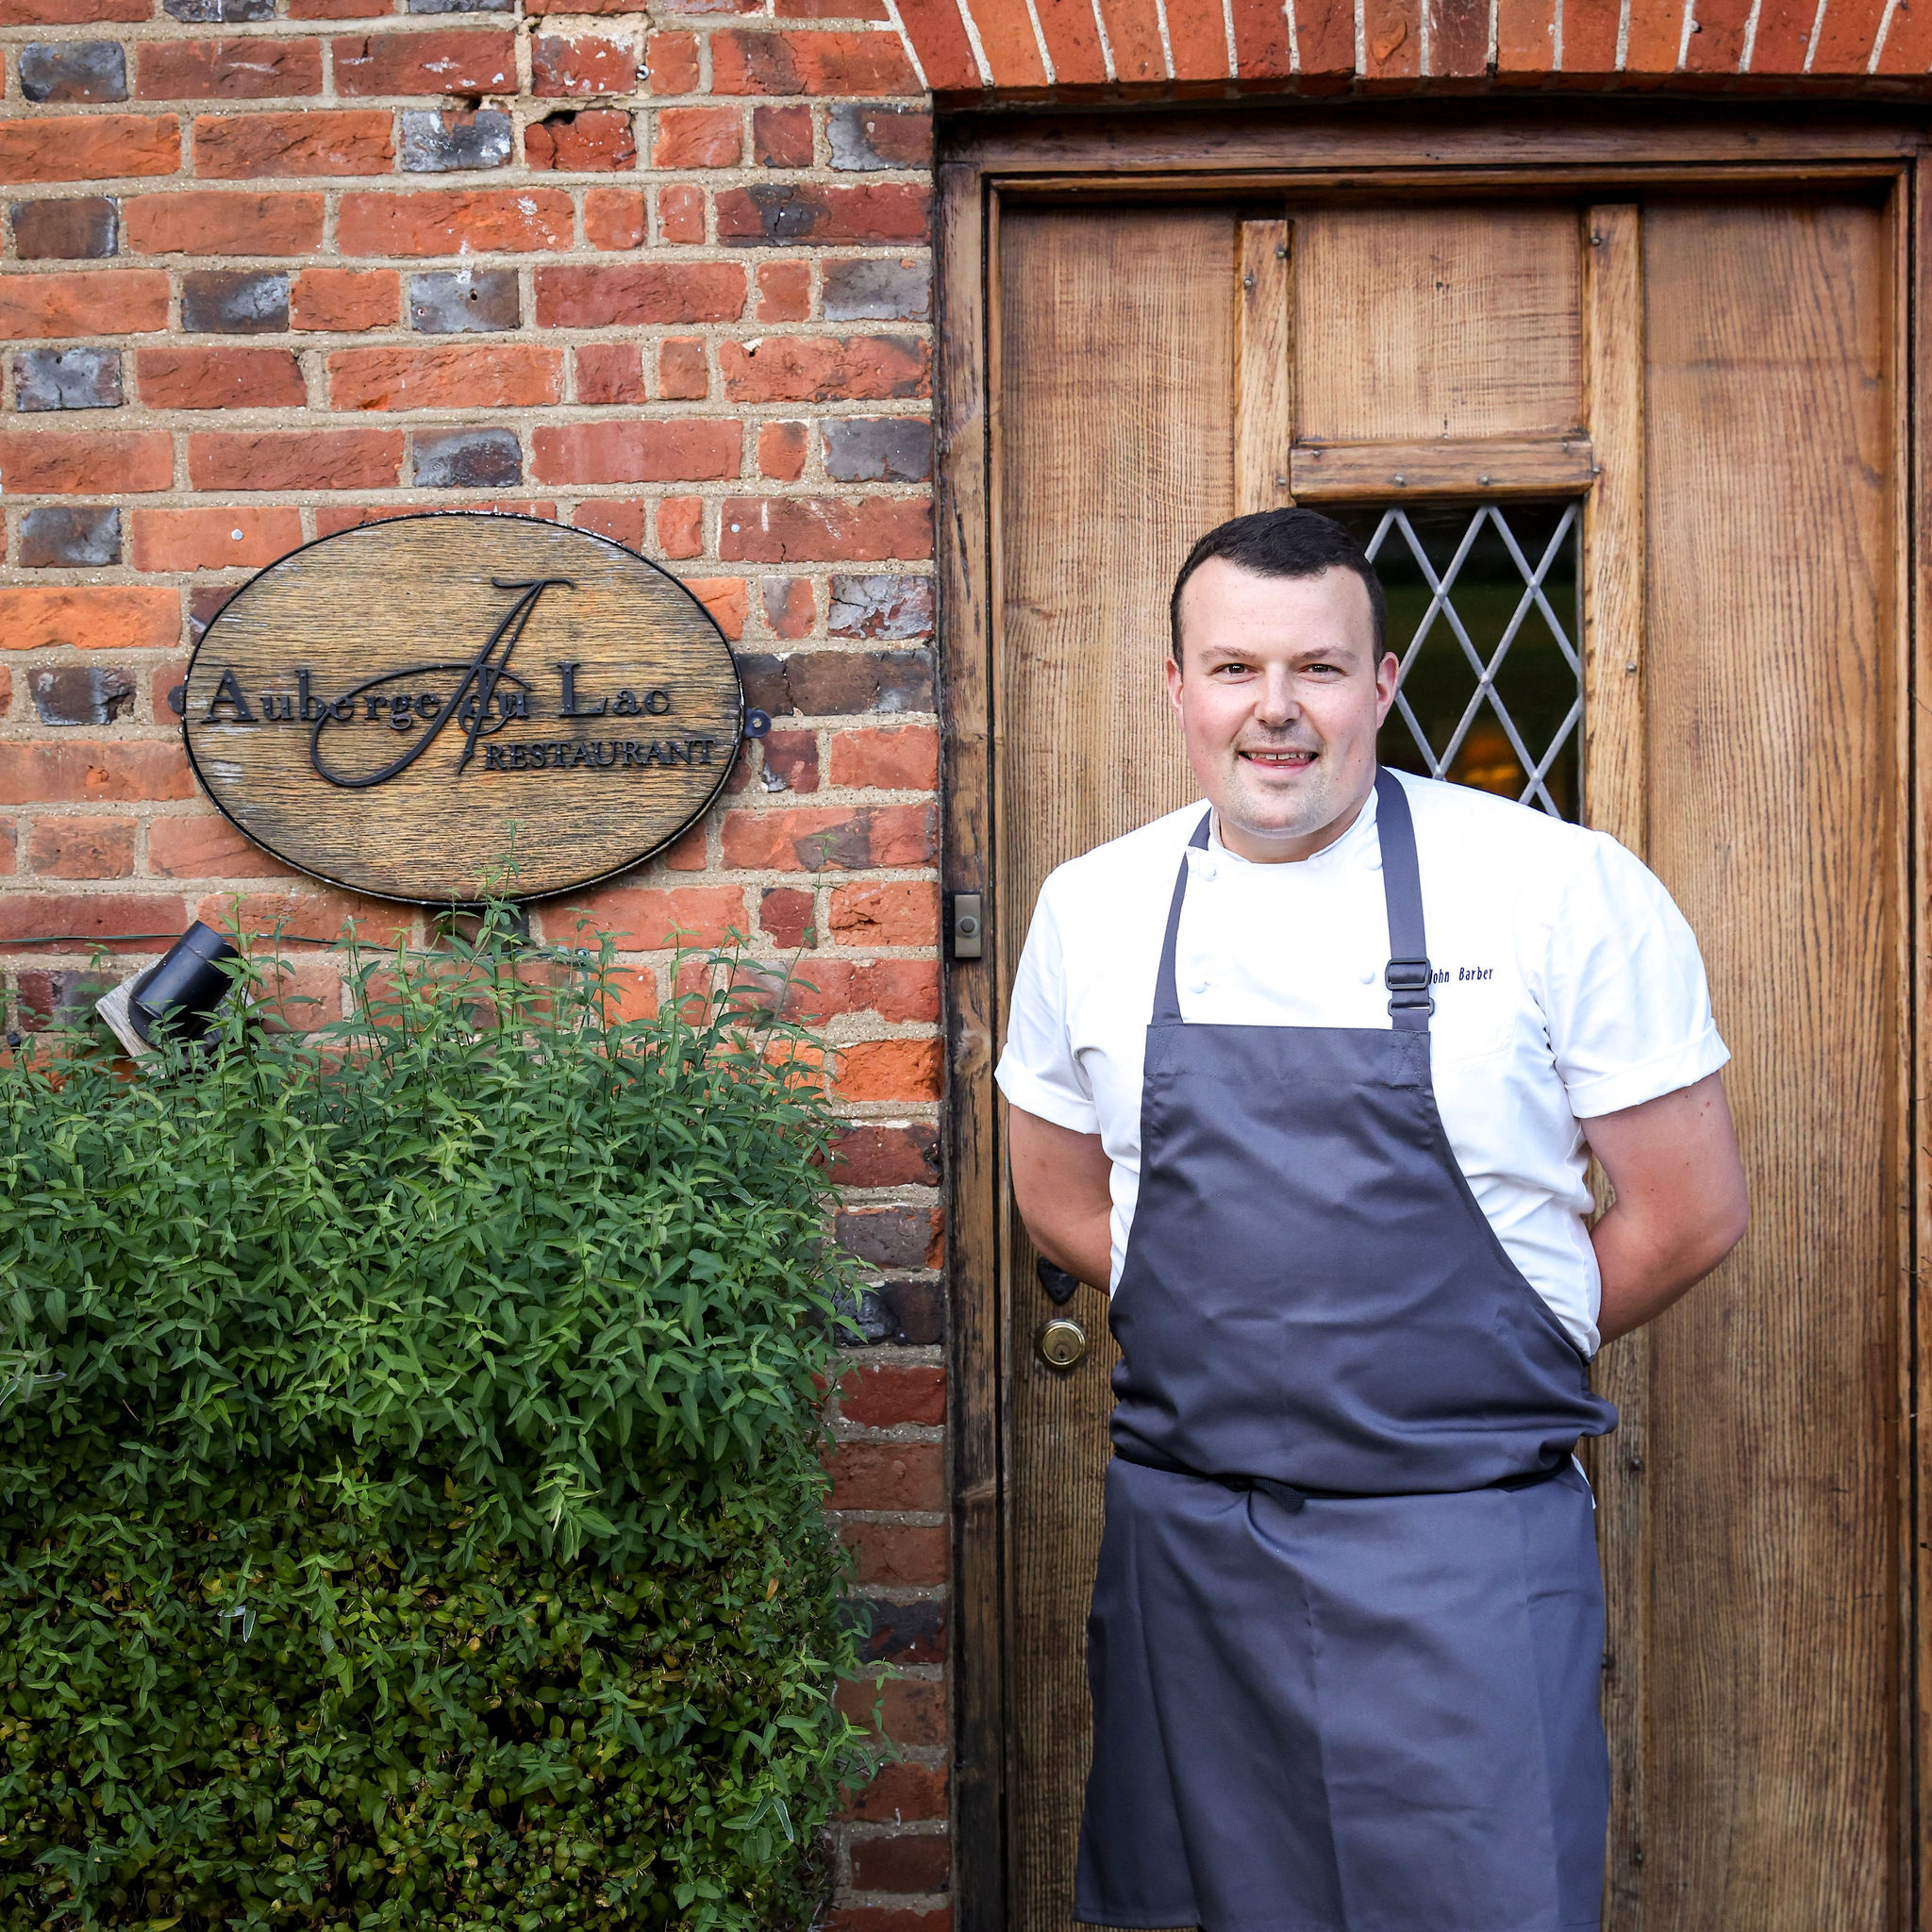 Experience the Culinary Renaissance of Auberge du Lac at Brocket Hall